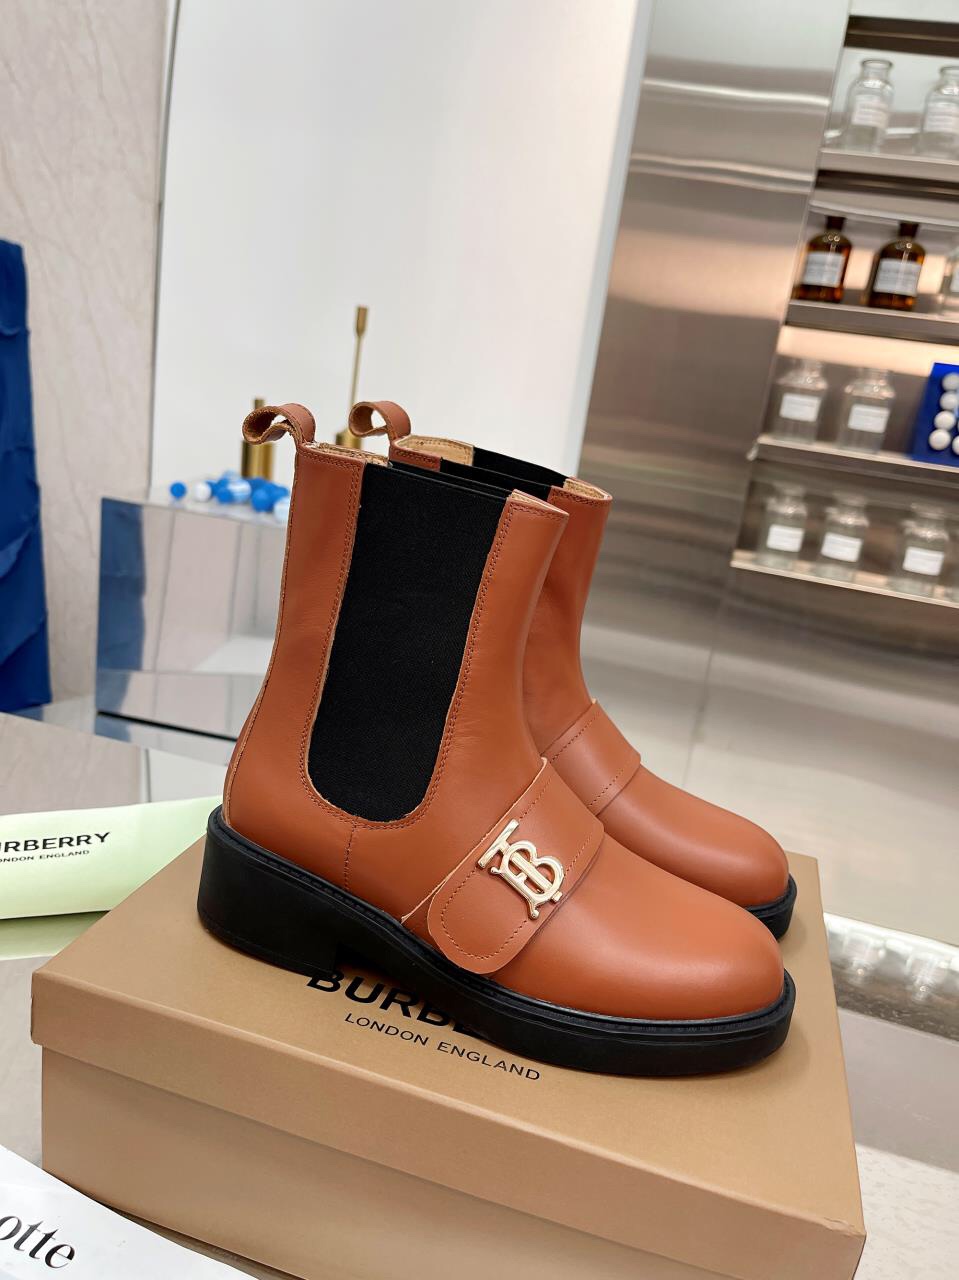 Burberry 25MM Jude Leather Ankle Boot For Women # 262829, cheap Burberry Rain Boots, only $115!